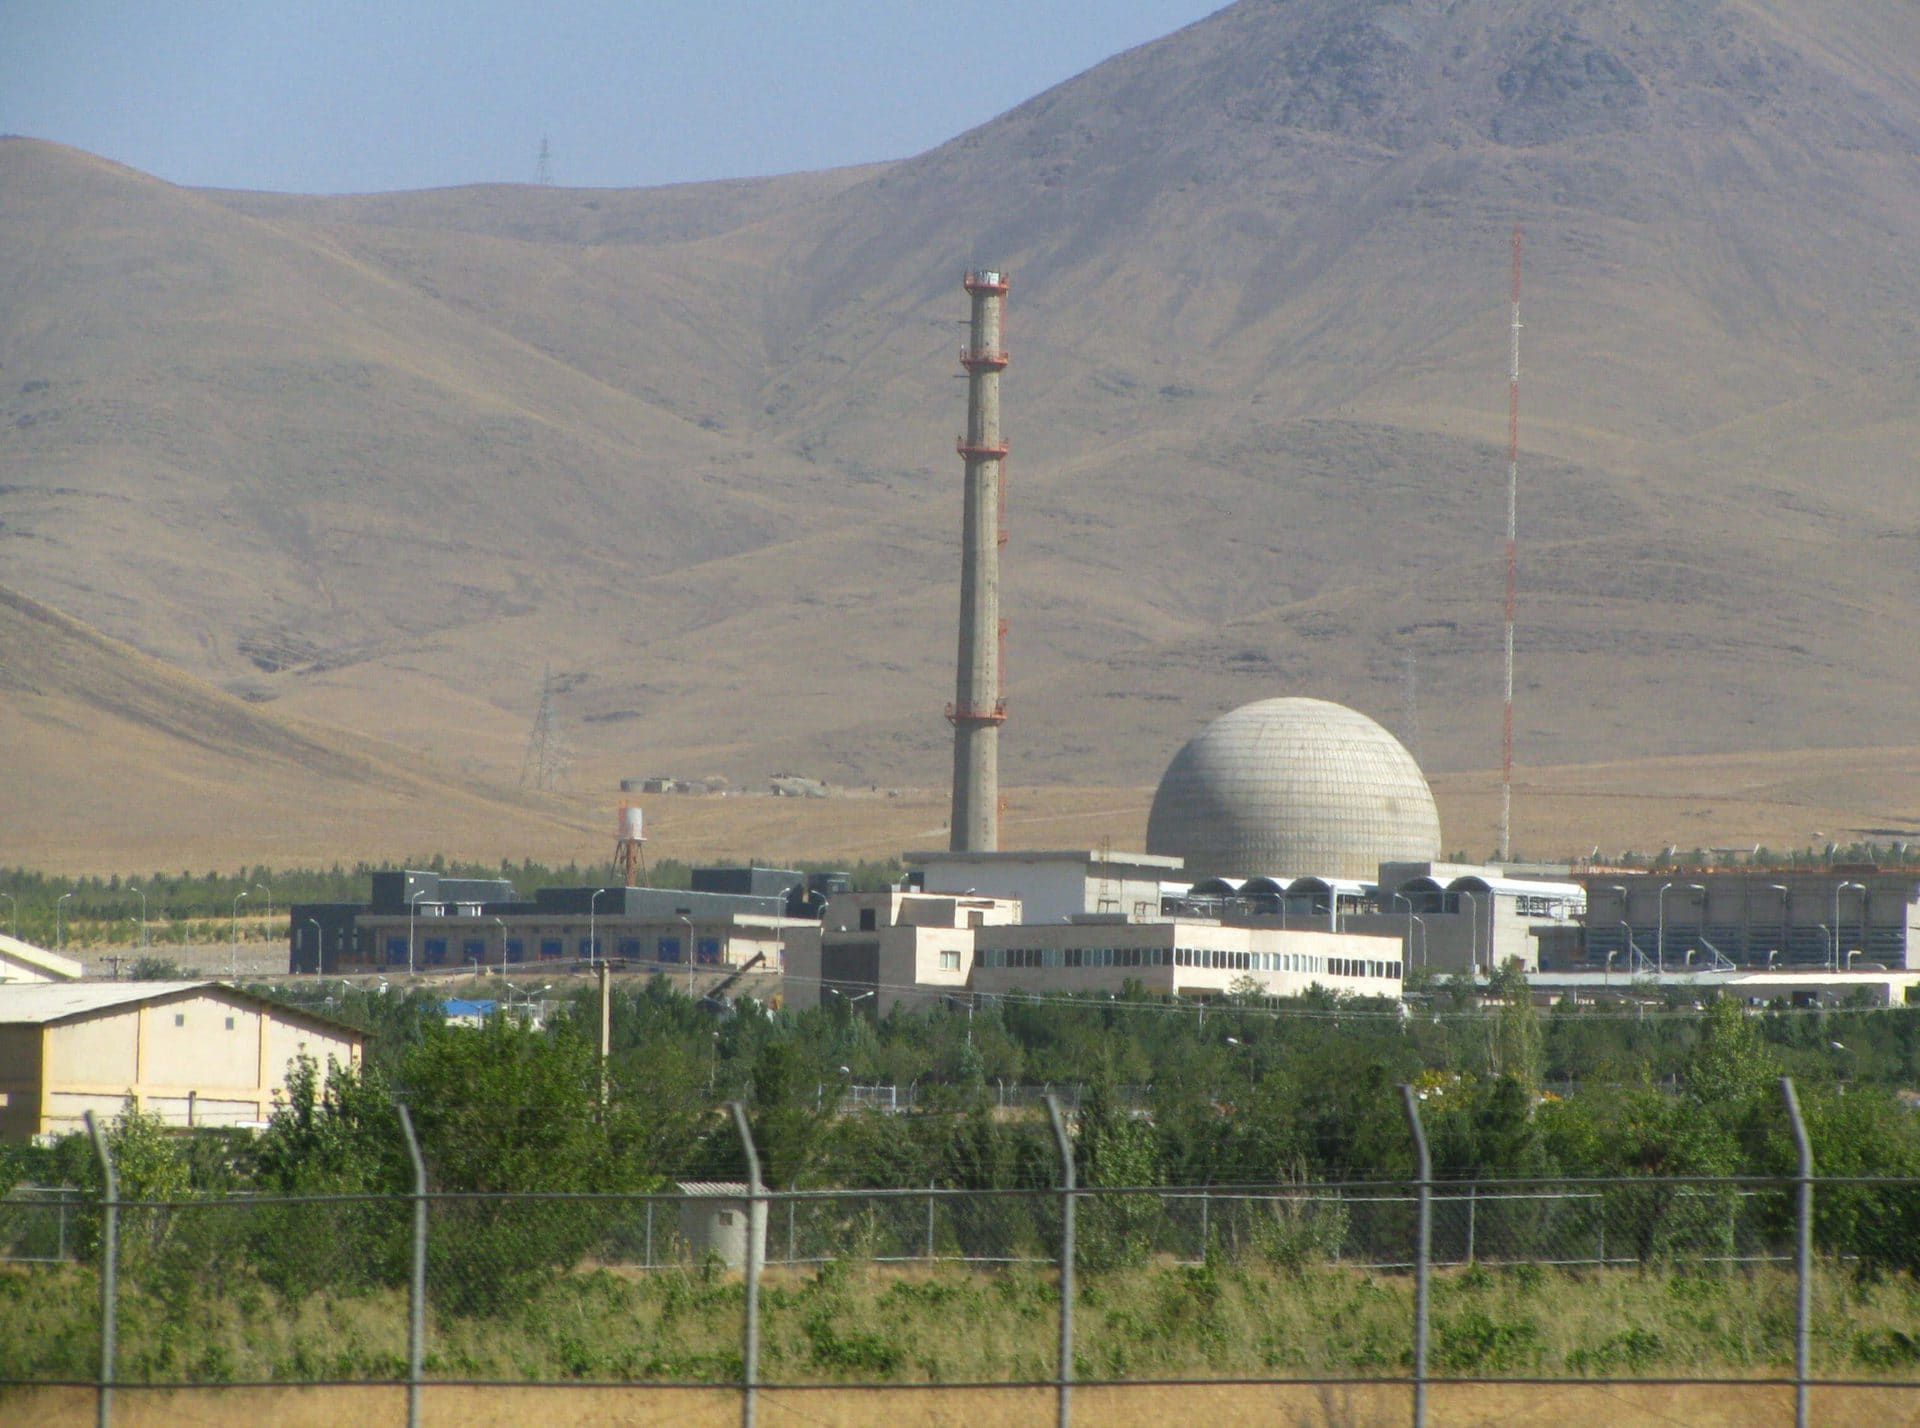 Iran's Heavy water production plant in Arak, Iran: The Global Threat